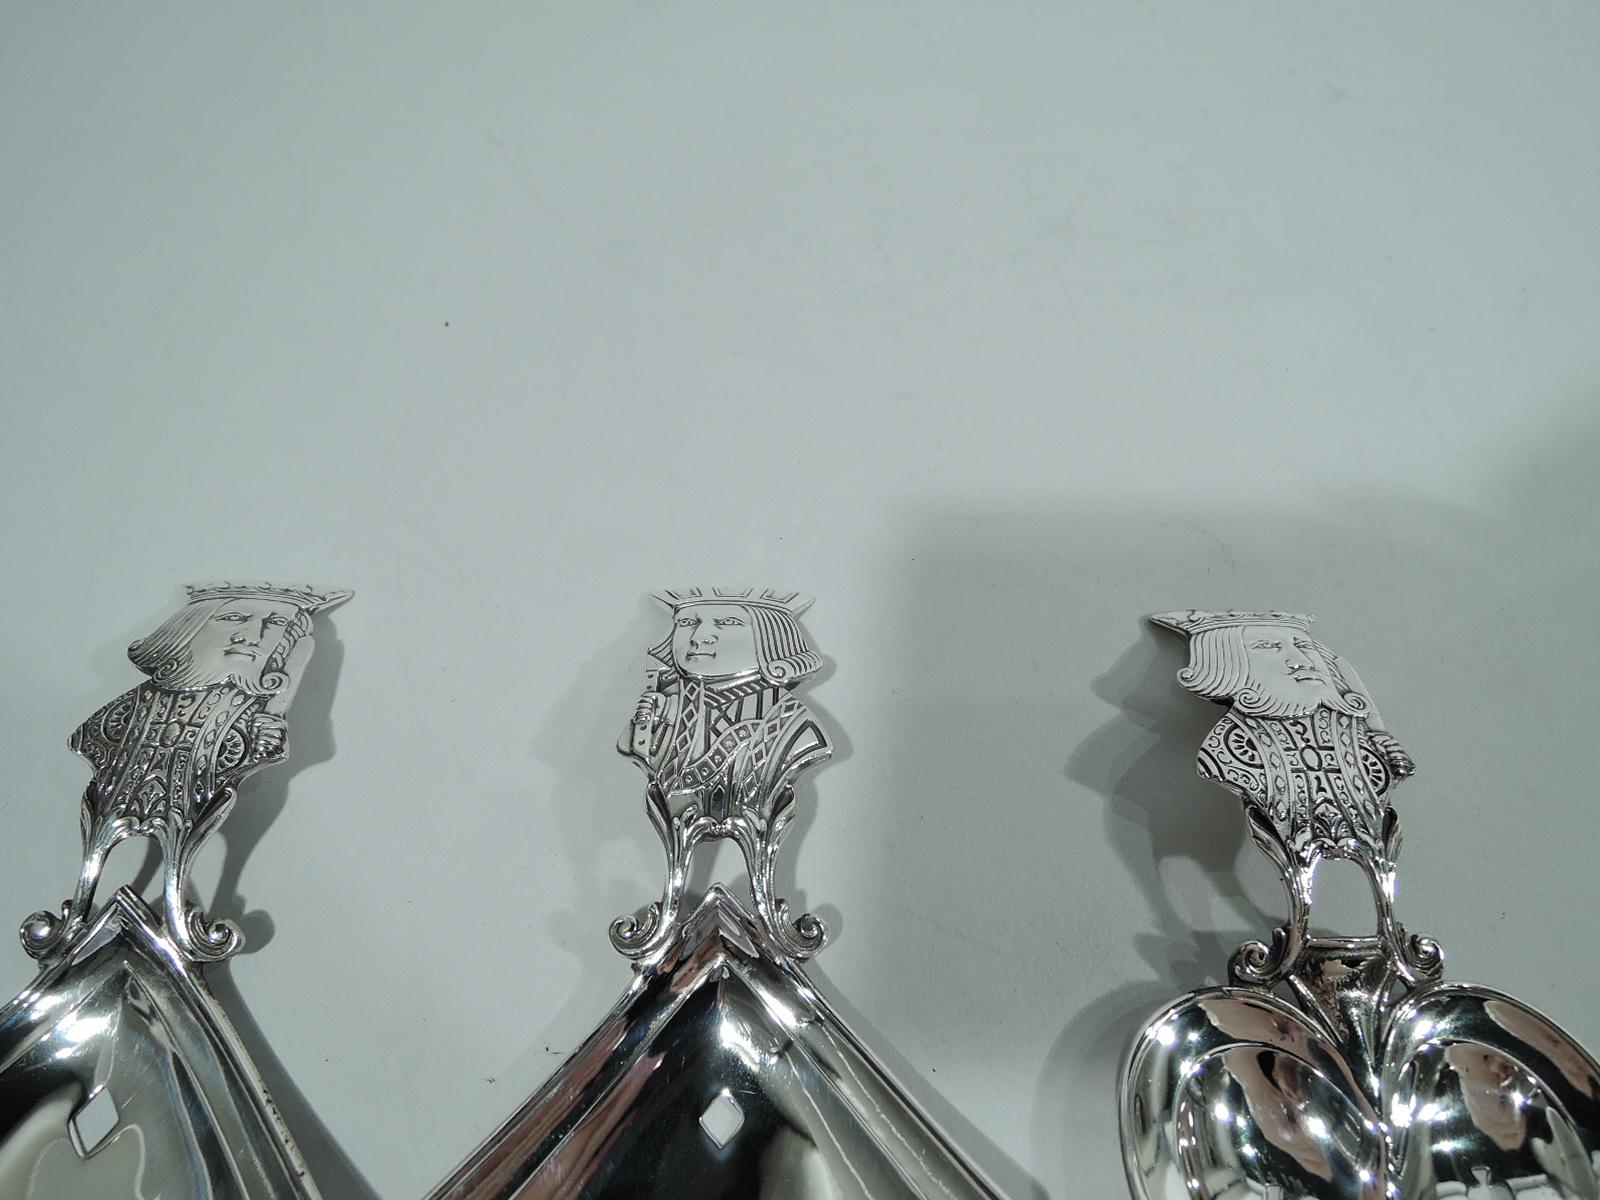 Set of 3 sterling silver bonbon scoops with playing card motif. Made by R. Blackinton & Co. in North Attleboro, ca 1910. This set comprises a king of hearts, a king of diamonds, and a jack of diamonds. Figural handles and suit-shaped bowls. A great